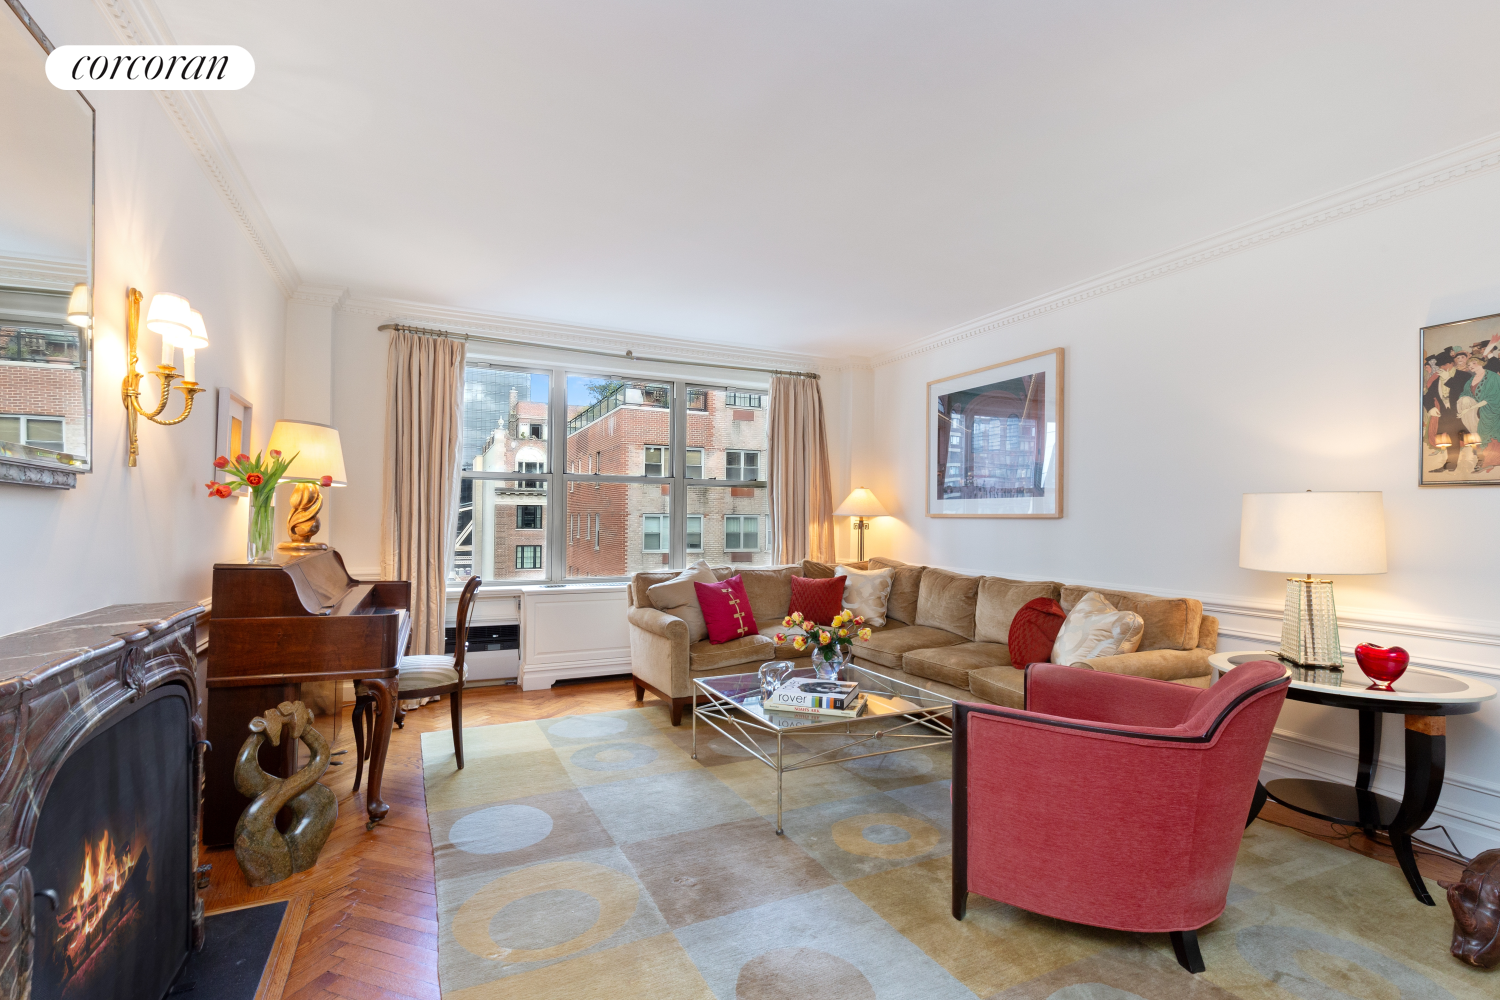 455 East 57th Street 15B, Sutton, Midtown East, NYC - 3 Bedrooms  
3 Bathrooms  
7 Rooms - 